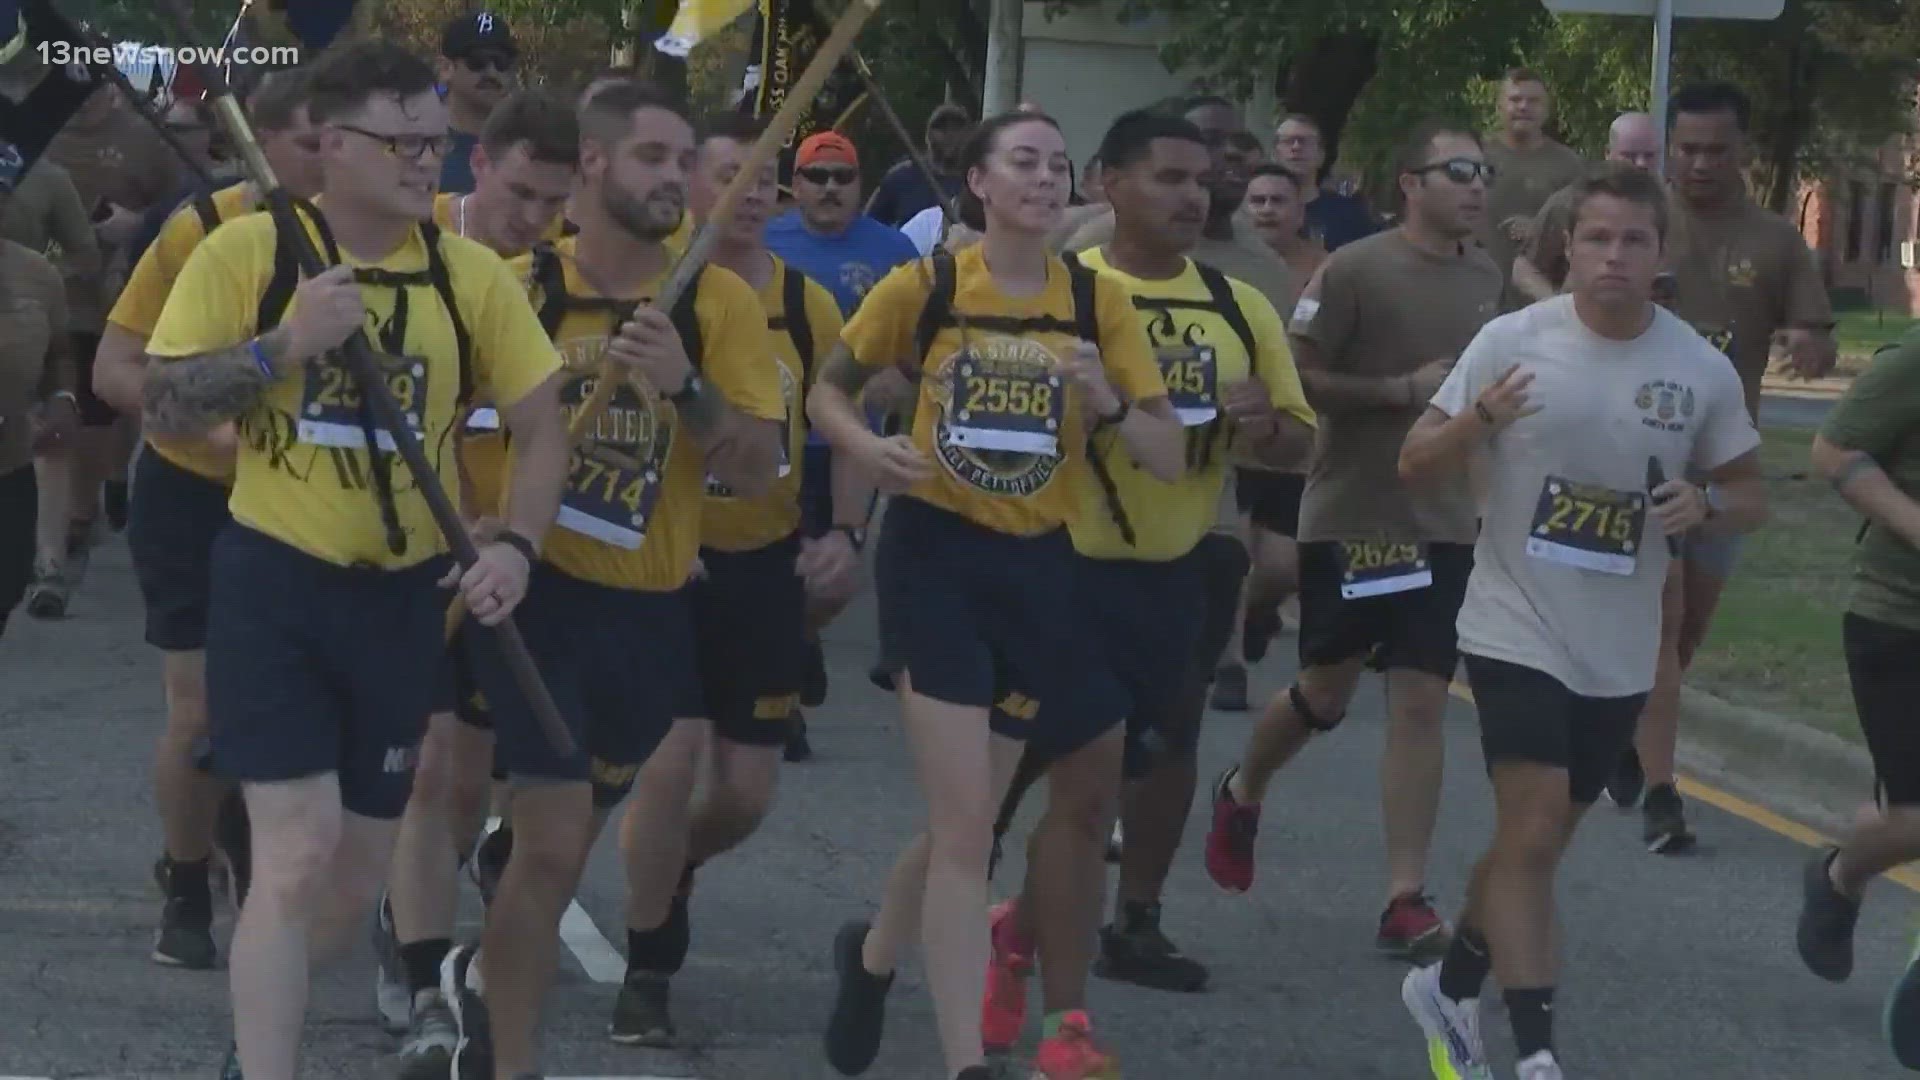 More than 3,000 sailors laced up their sneakers today for an annual Navy tradition. The "Run with the Chiefs 5K" returned to Naval Station Norfolk for the 18th year.